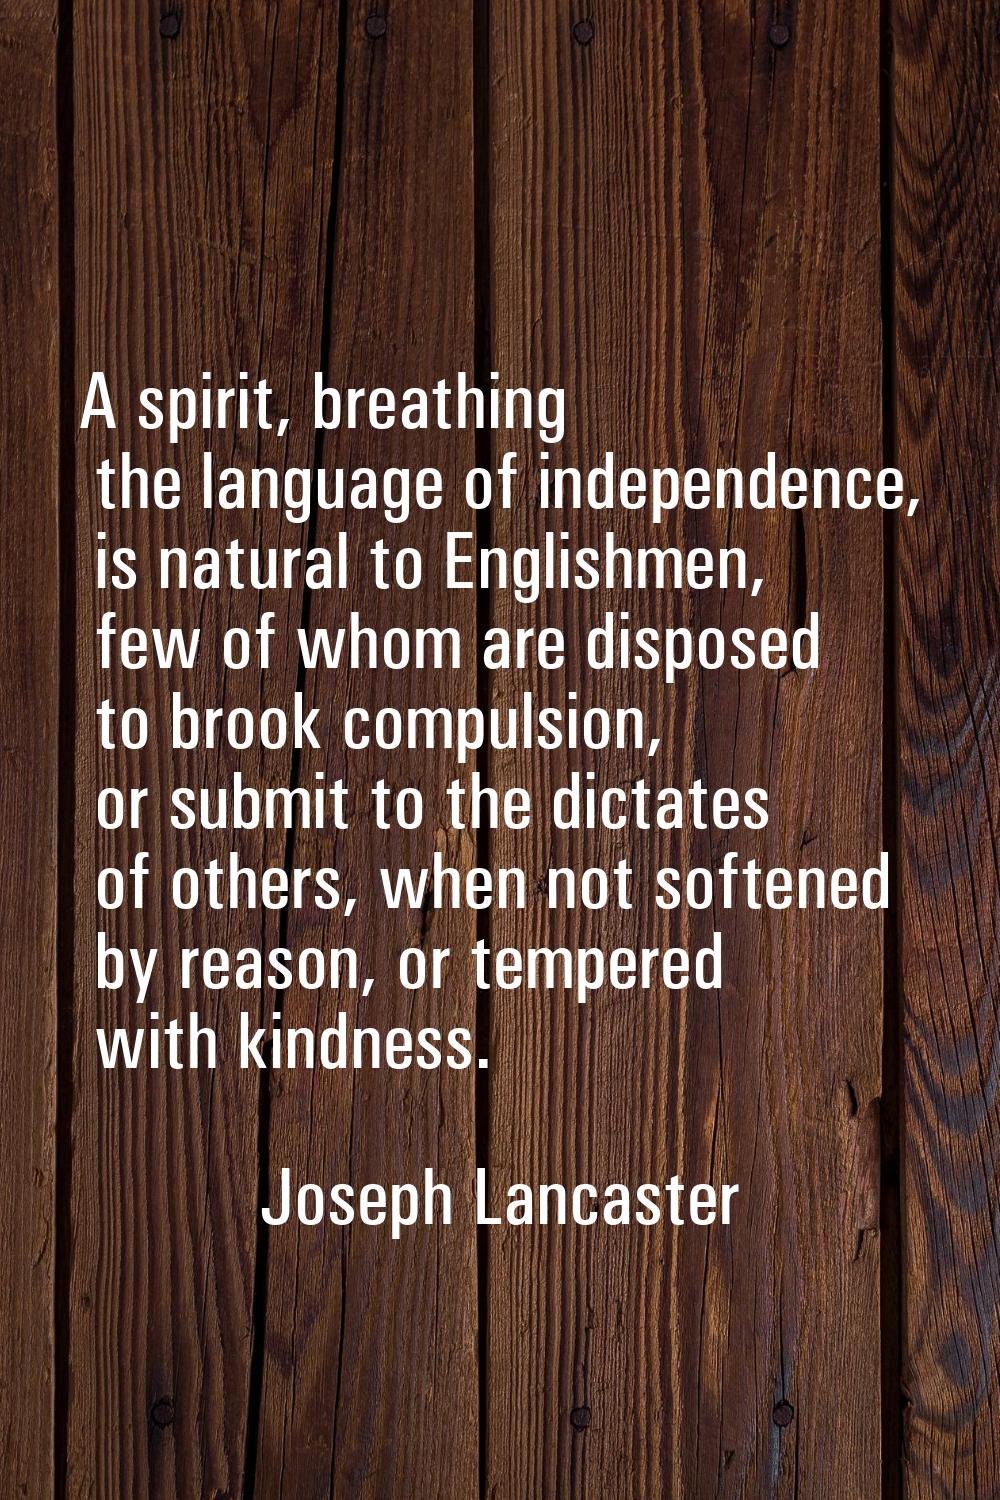 A spirit, breathing the language of independence, is natural to Englishmen, few of whom are dispose